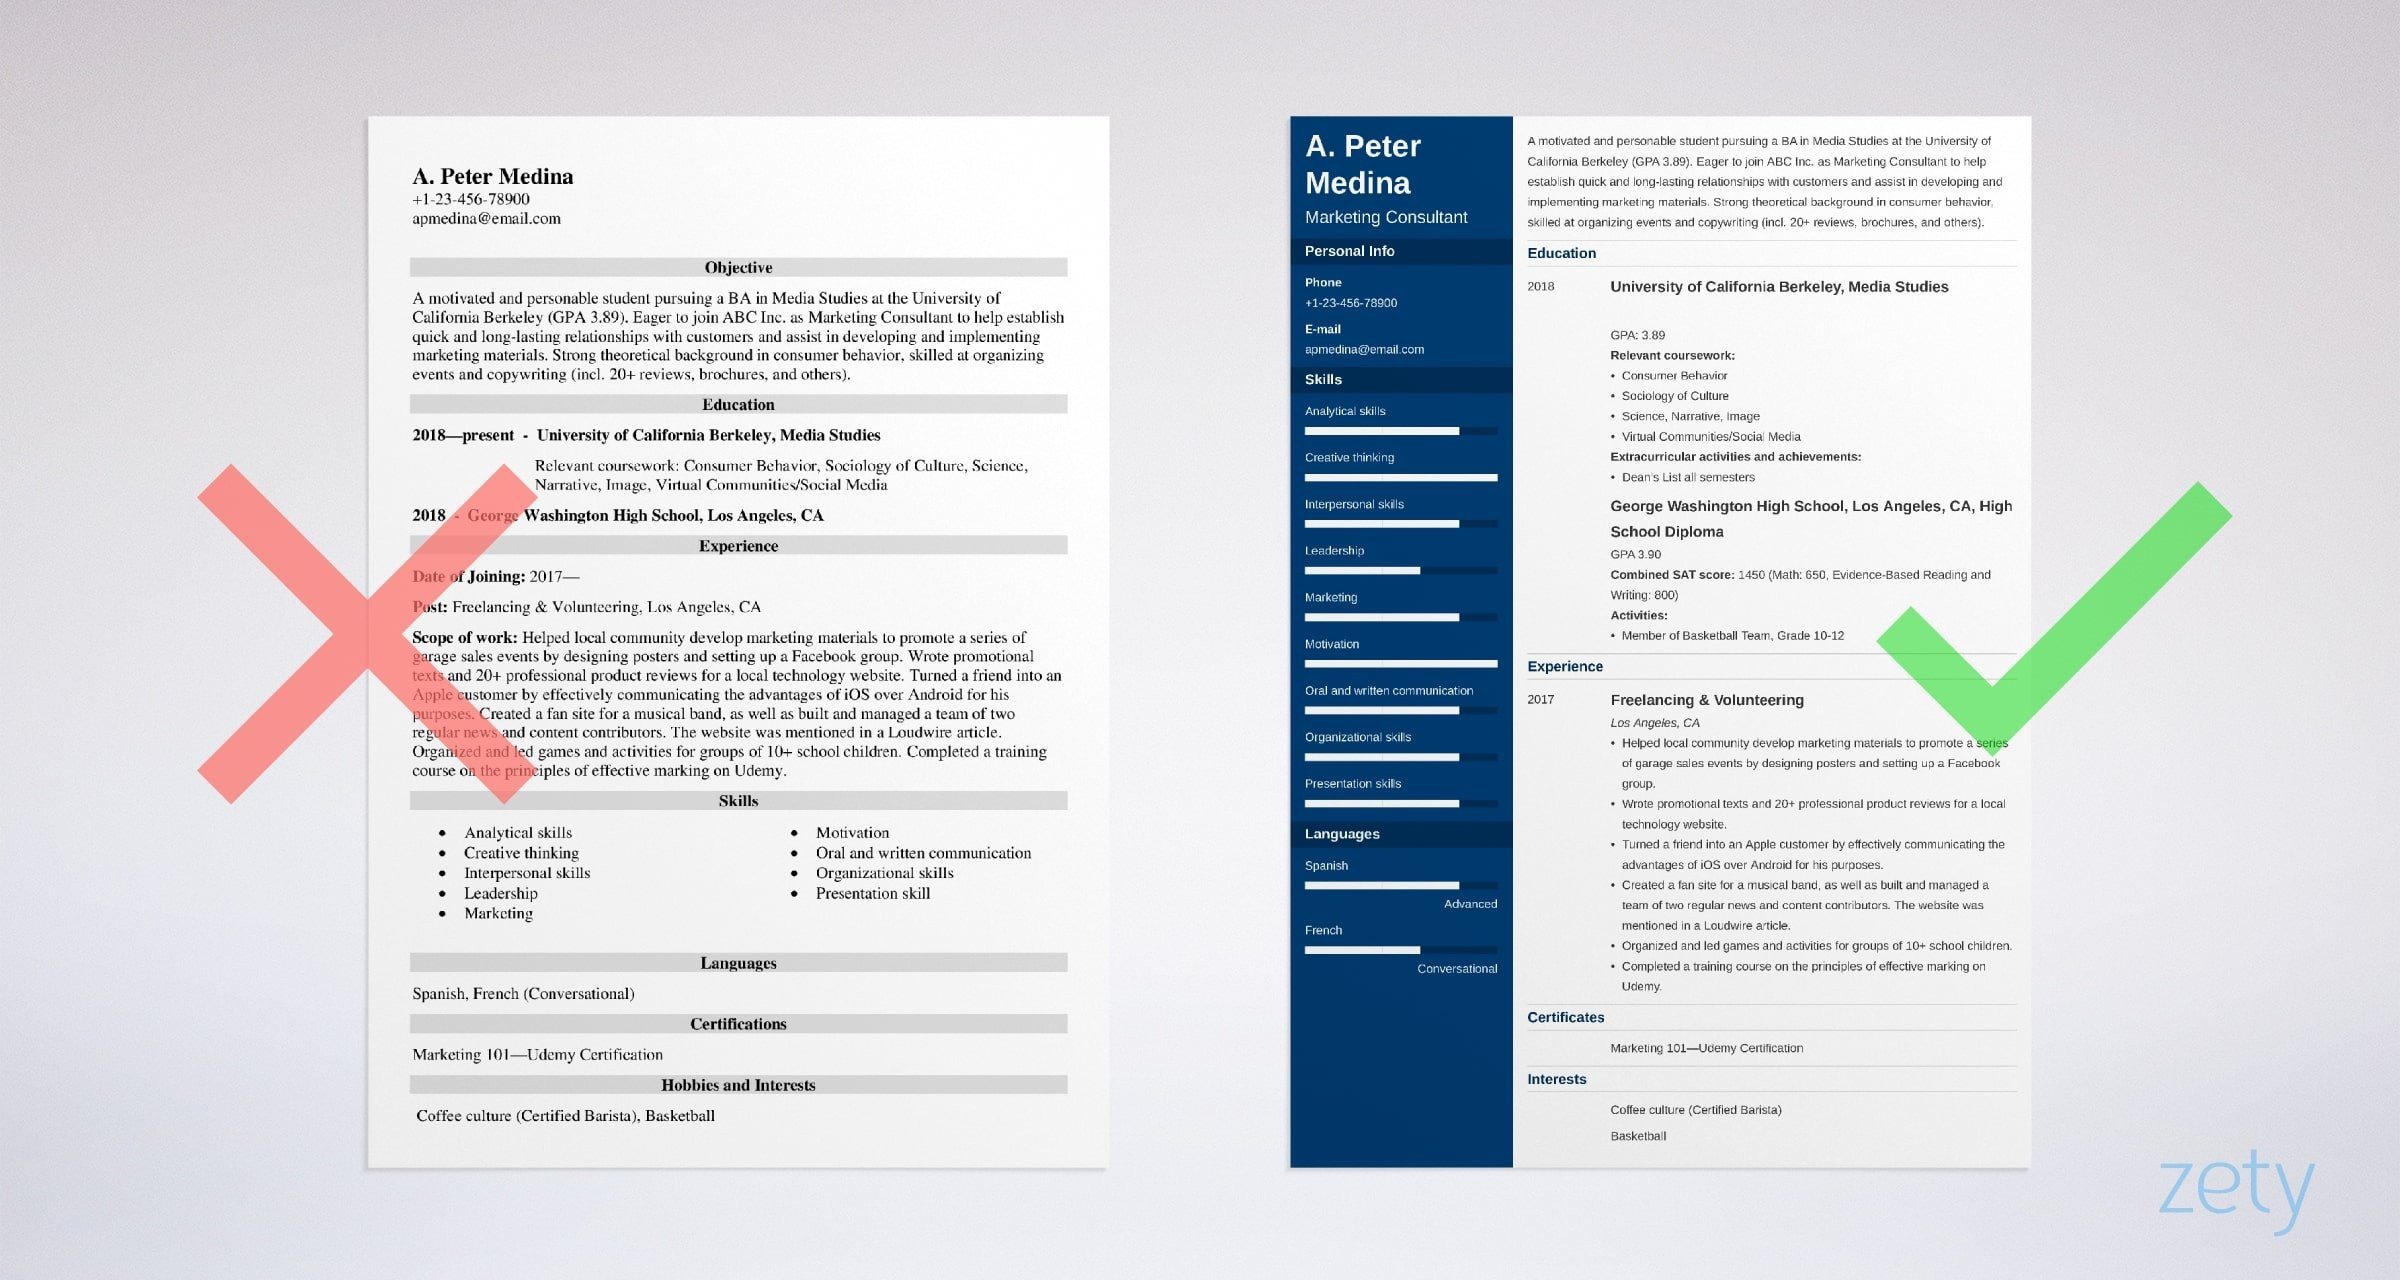 Resume Templates for Students with Little Experience How to Write A Resume with No Experience & Get the First Job